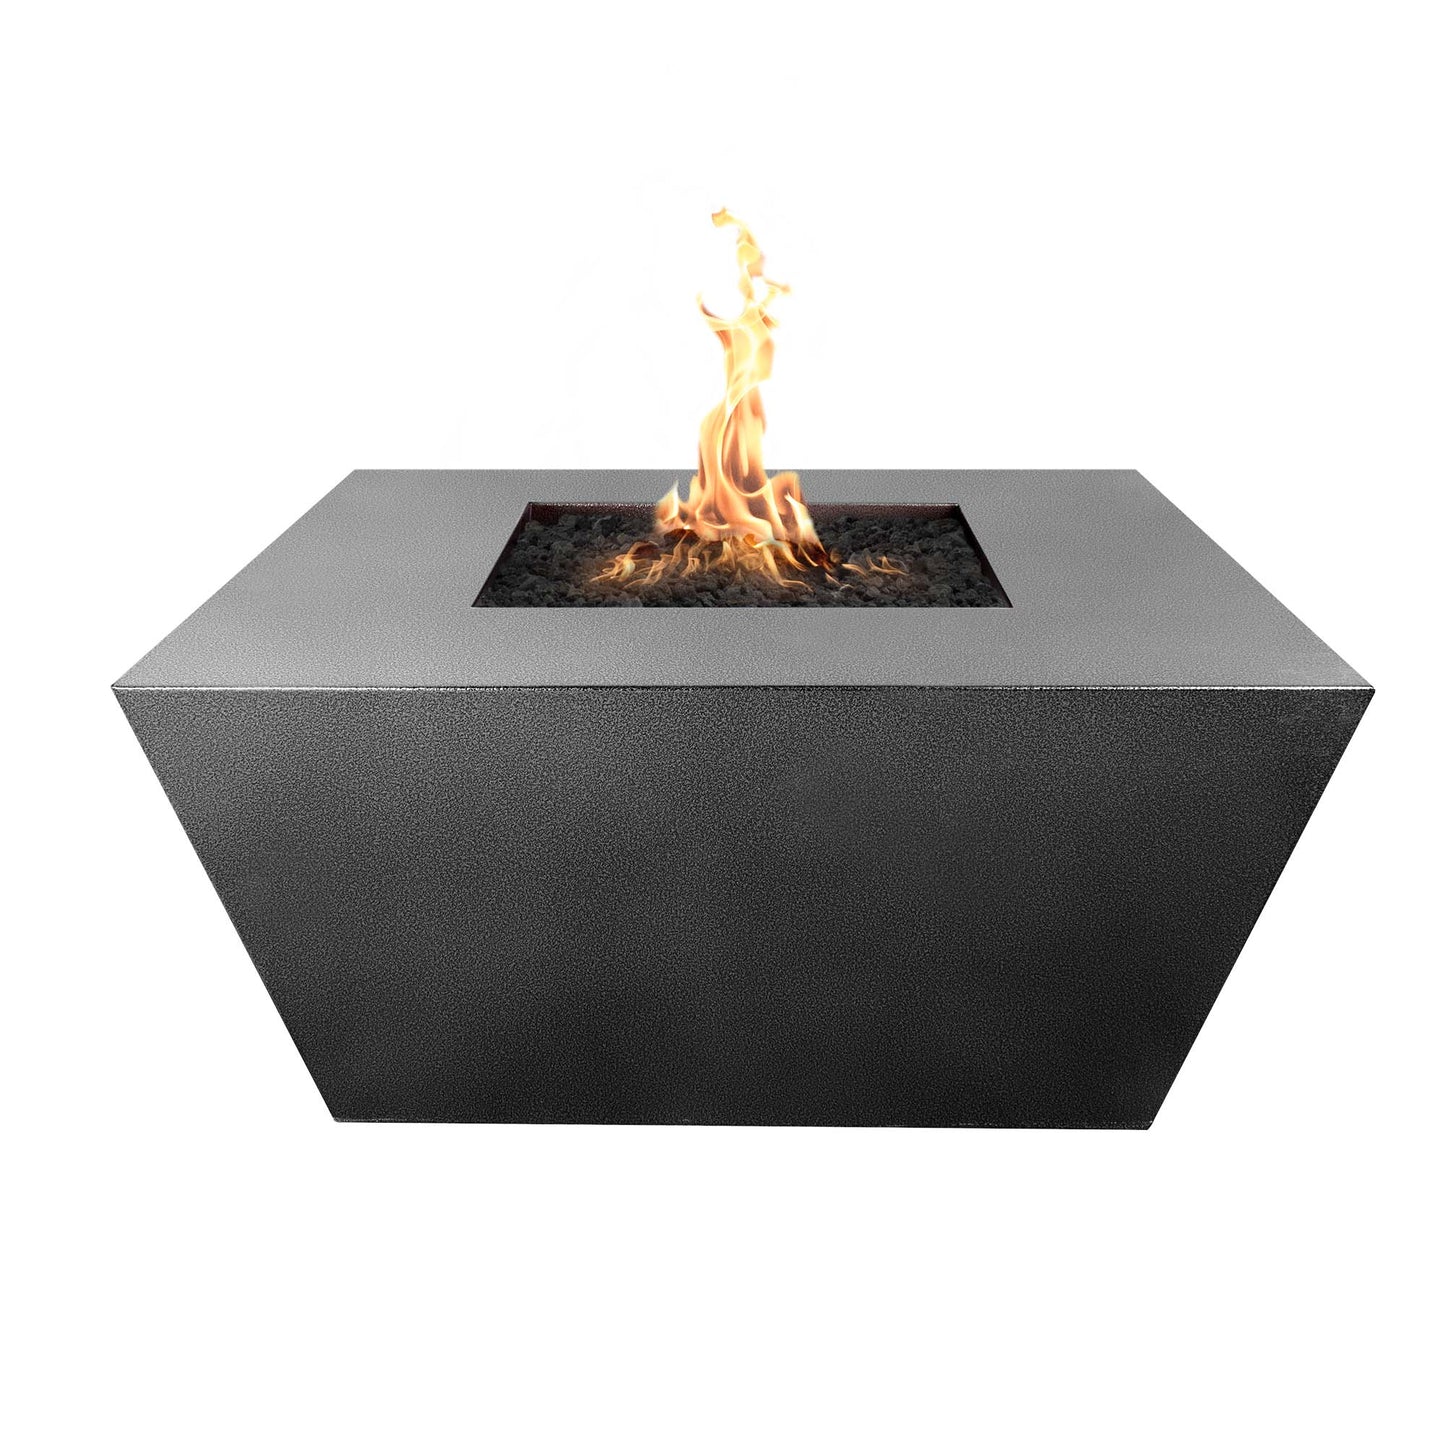 The Outdoor Plus Square Redan 48" Stainless Steel Liquid Propane Fire Pit with Match Lit Ignition